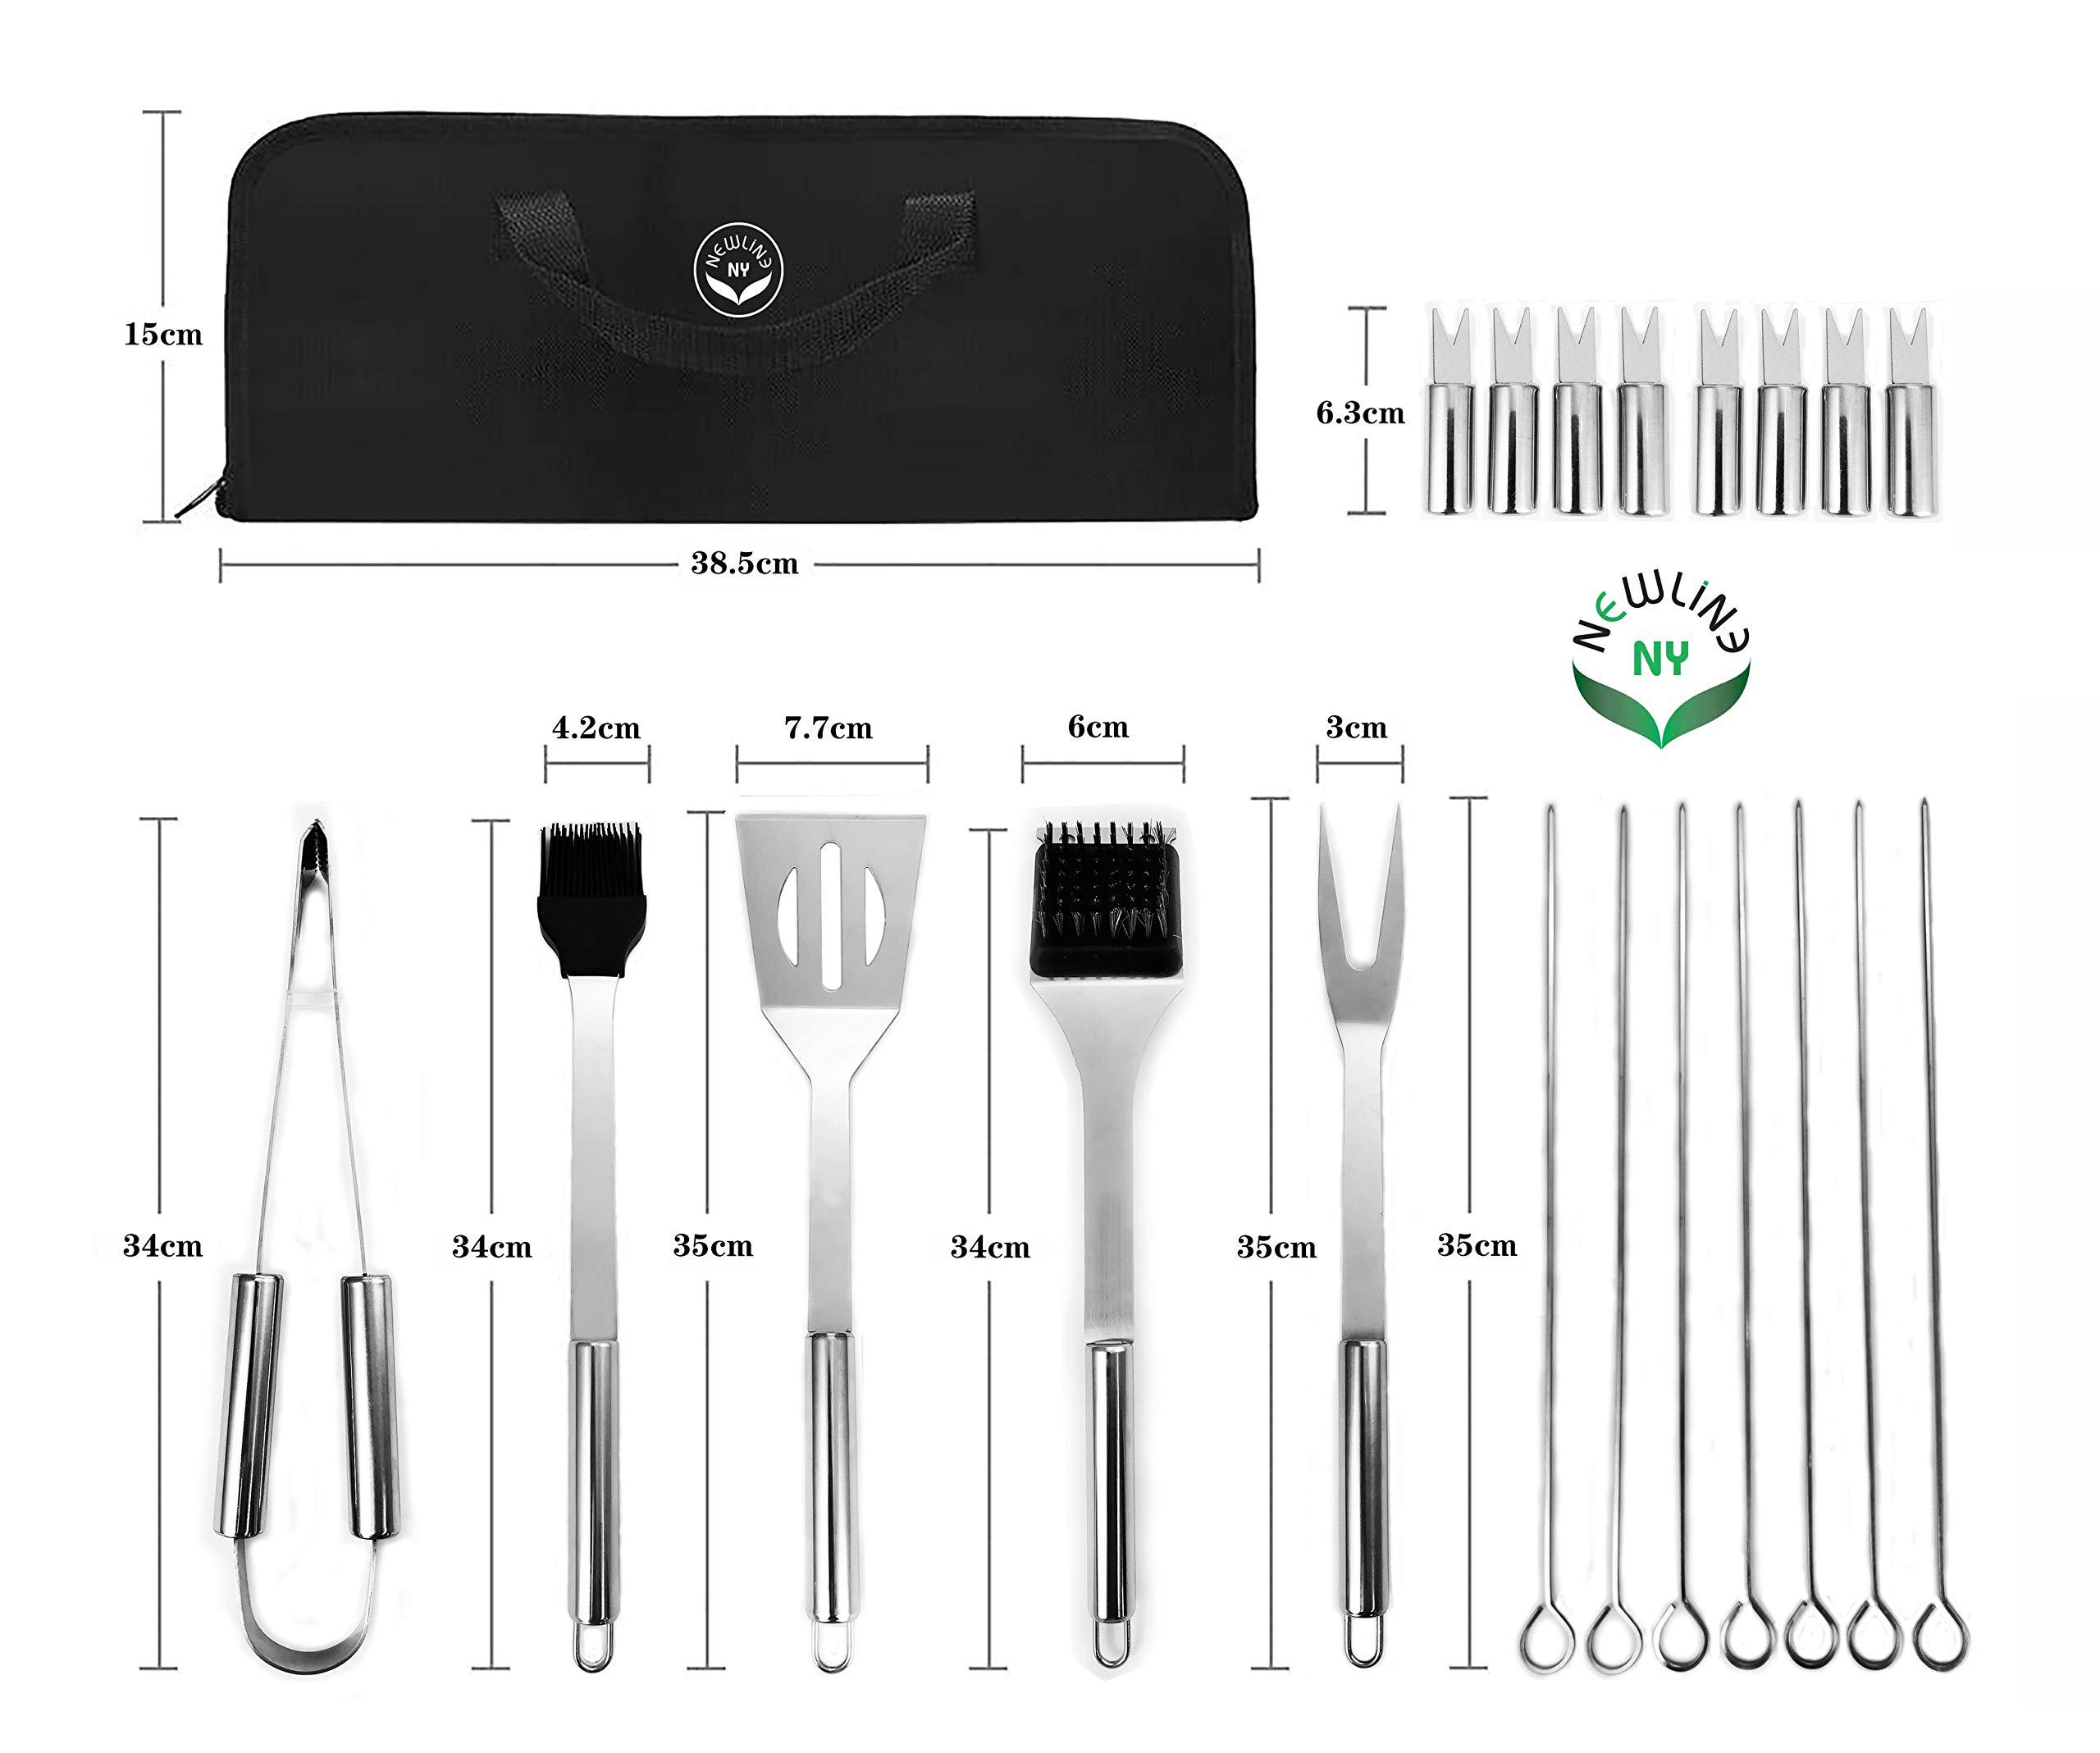 Newline NY newlineny stainless steel bbq grill tool kit 20 pcs + carrying bag set : tong, basting brush, spatula, cleaning brush, meat f